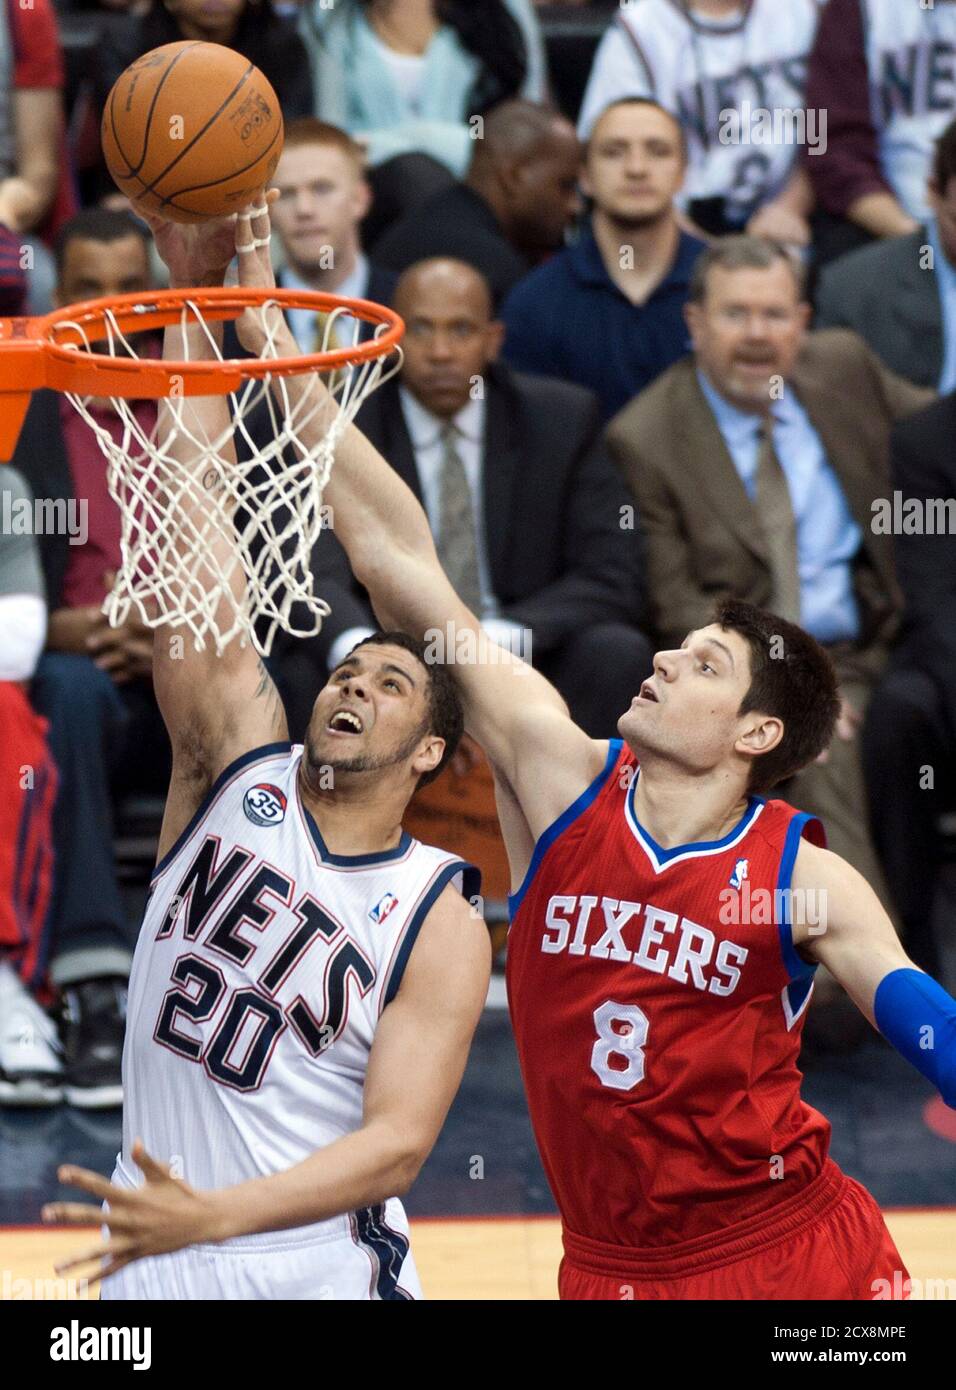 New Jersey Nets forward Jordan Williams (20) tries a layup past  Philadelphia 76ers center Nikola Vucevic (8) in the first quarter of their  NBA basketball game in Newark, New Jersey, April 23,